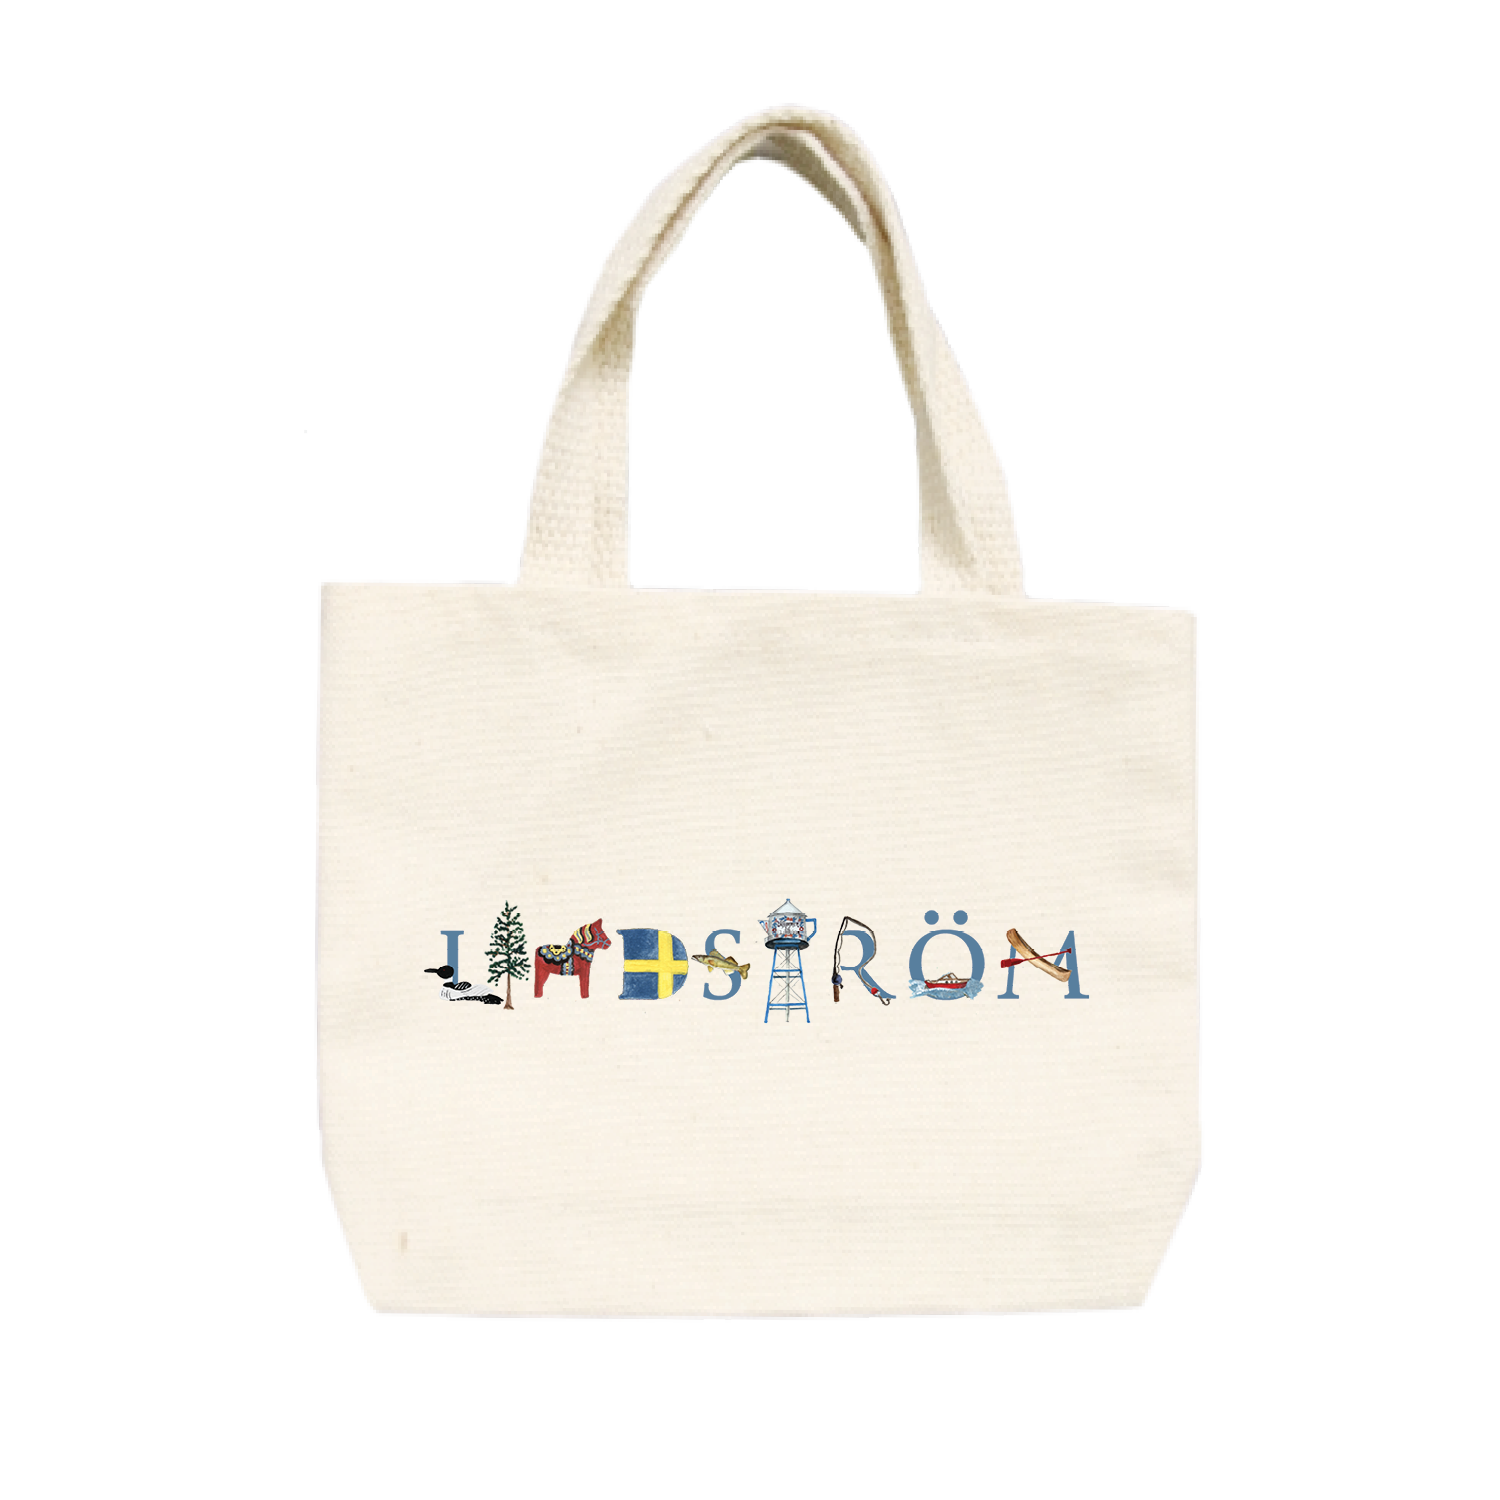 Lindstrom small tote